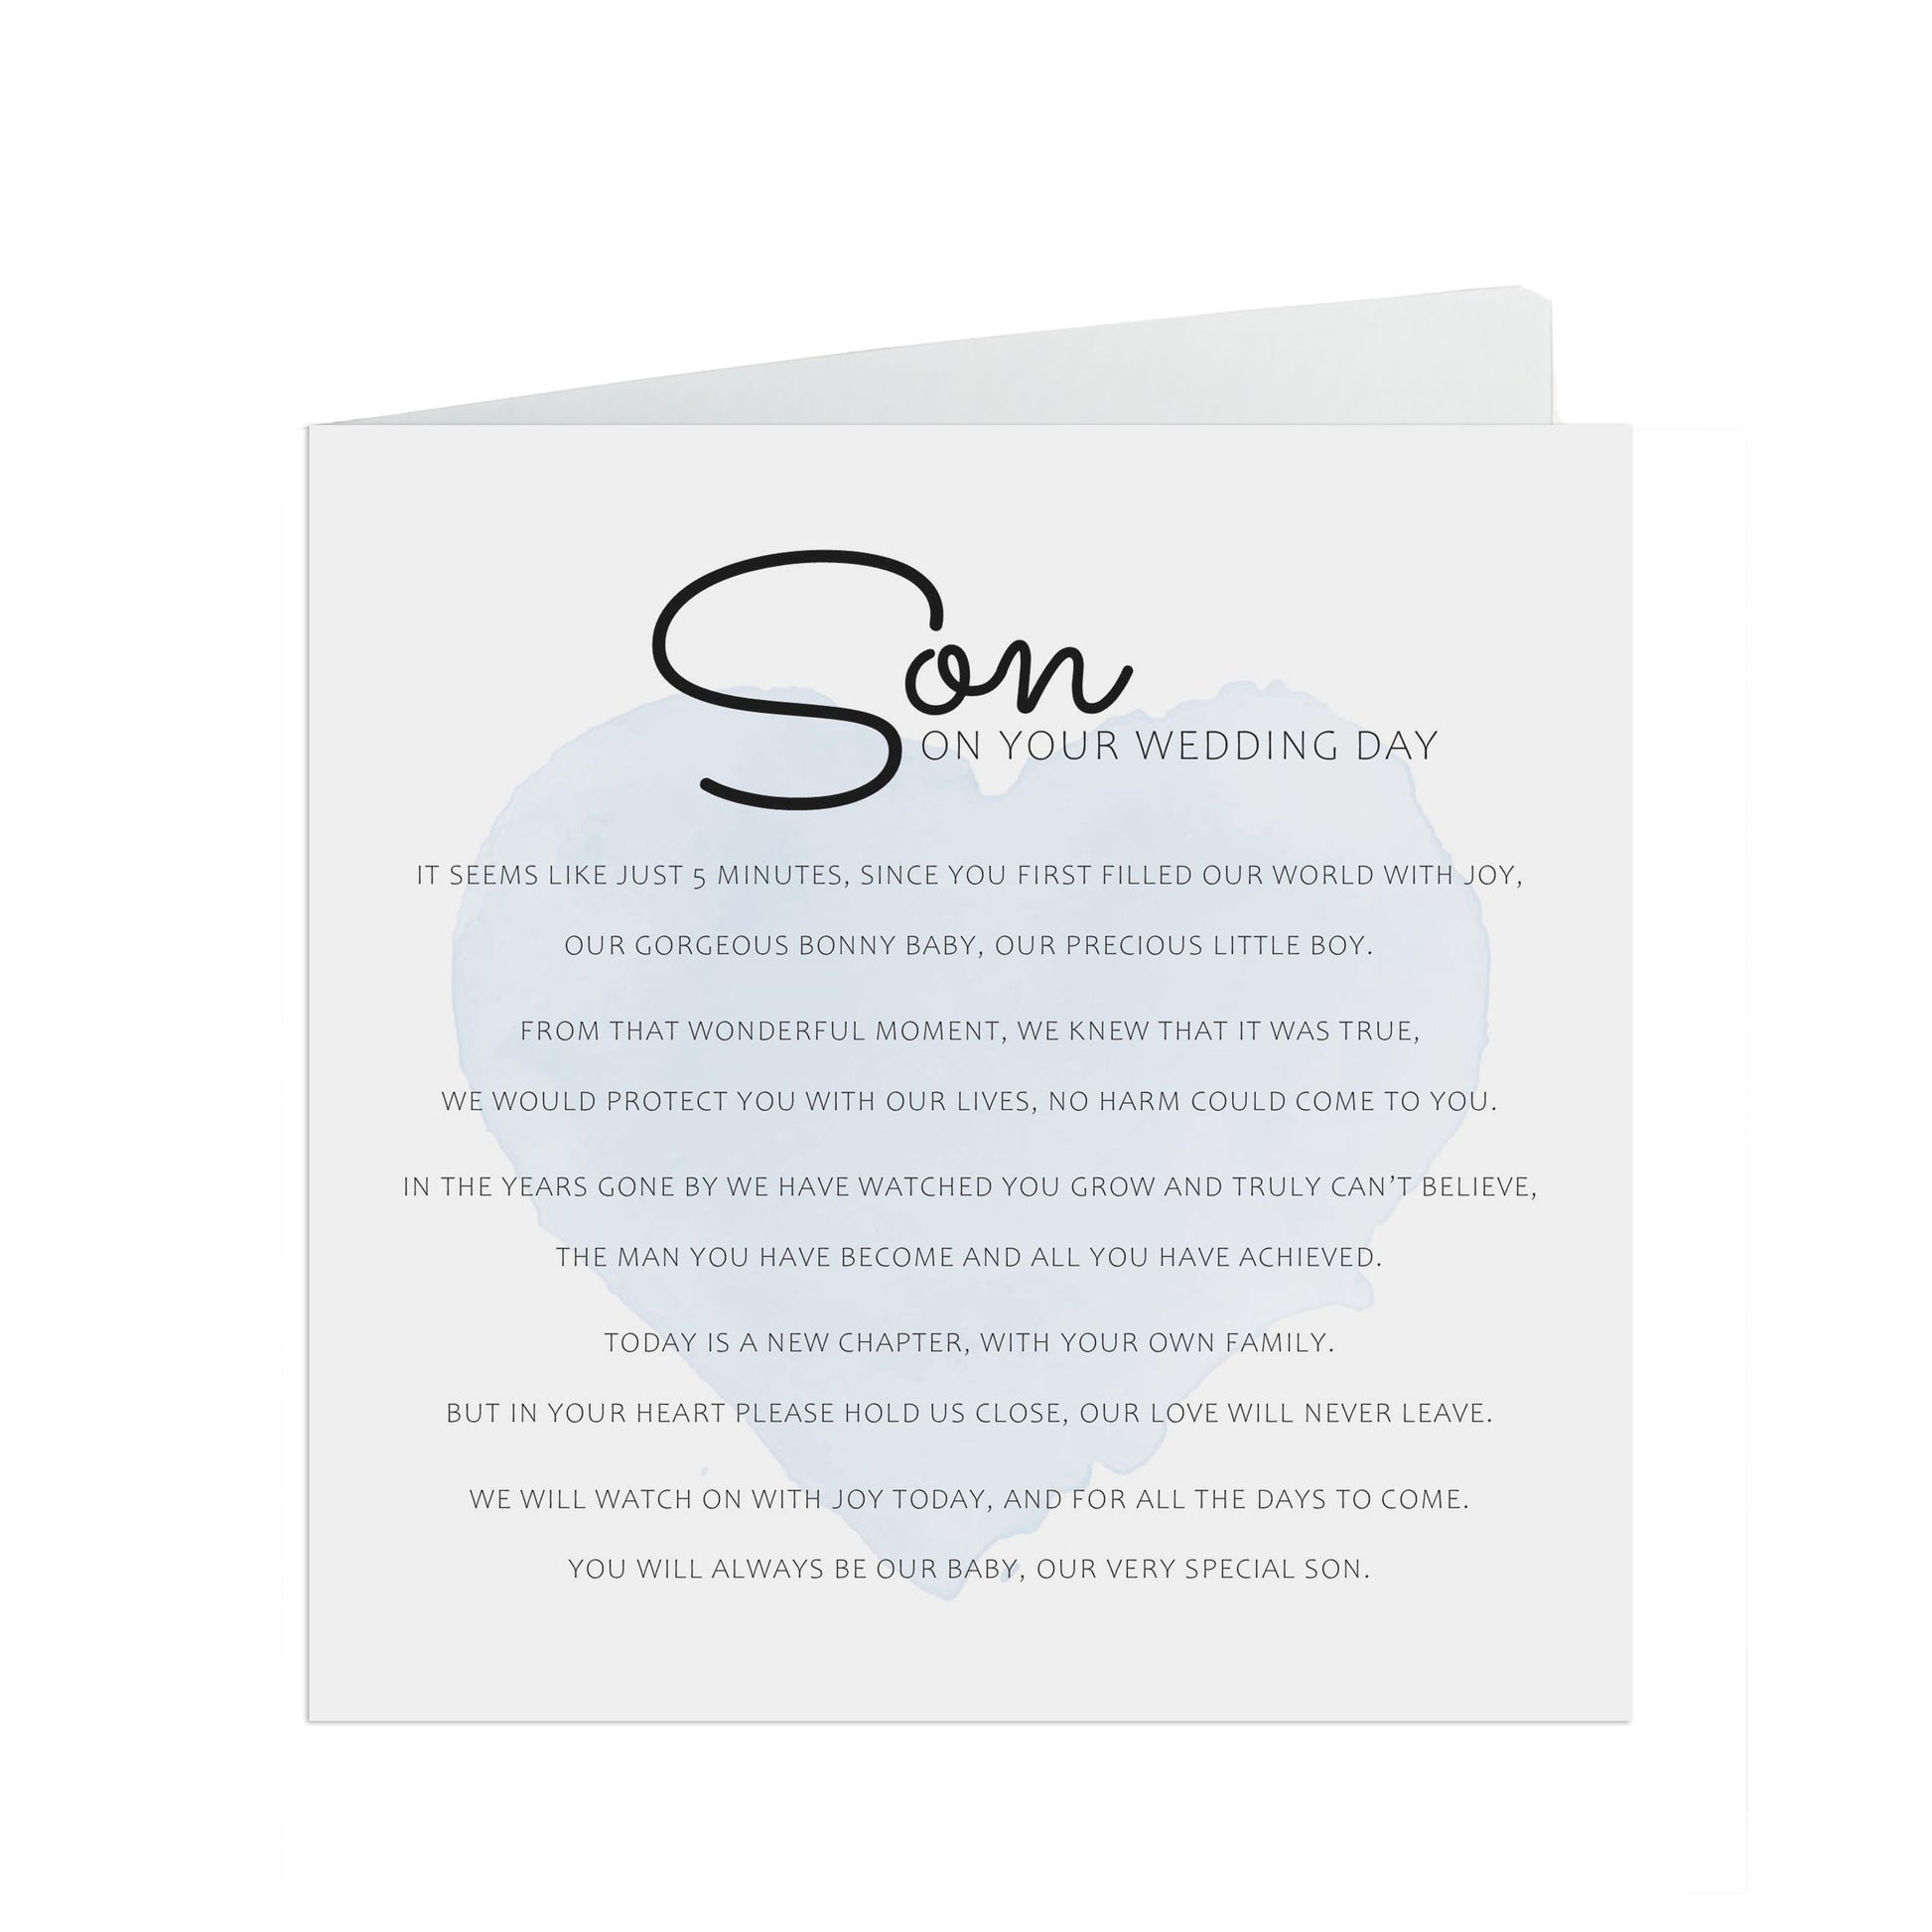 Son On Your Wedding Day, Sentimental Wedding Card From Parents